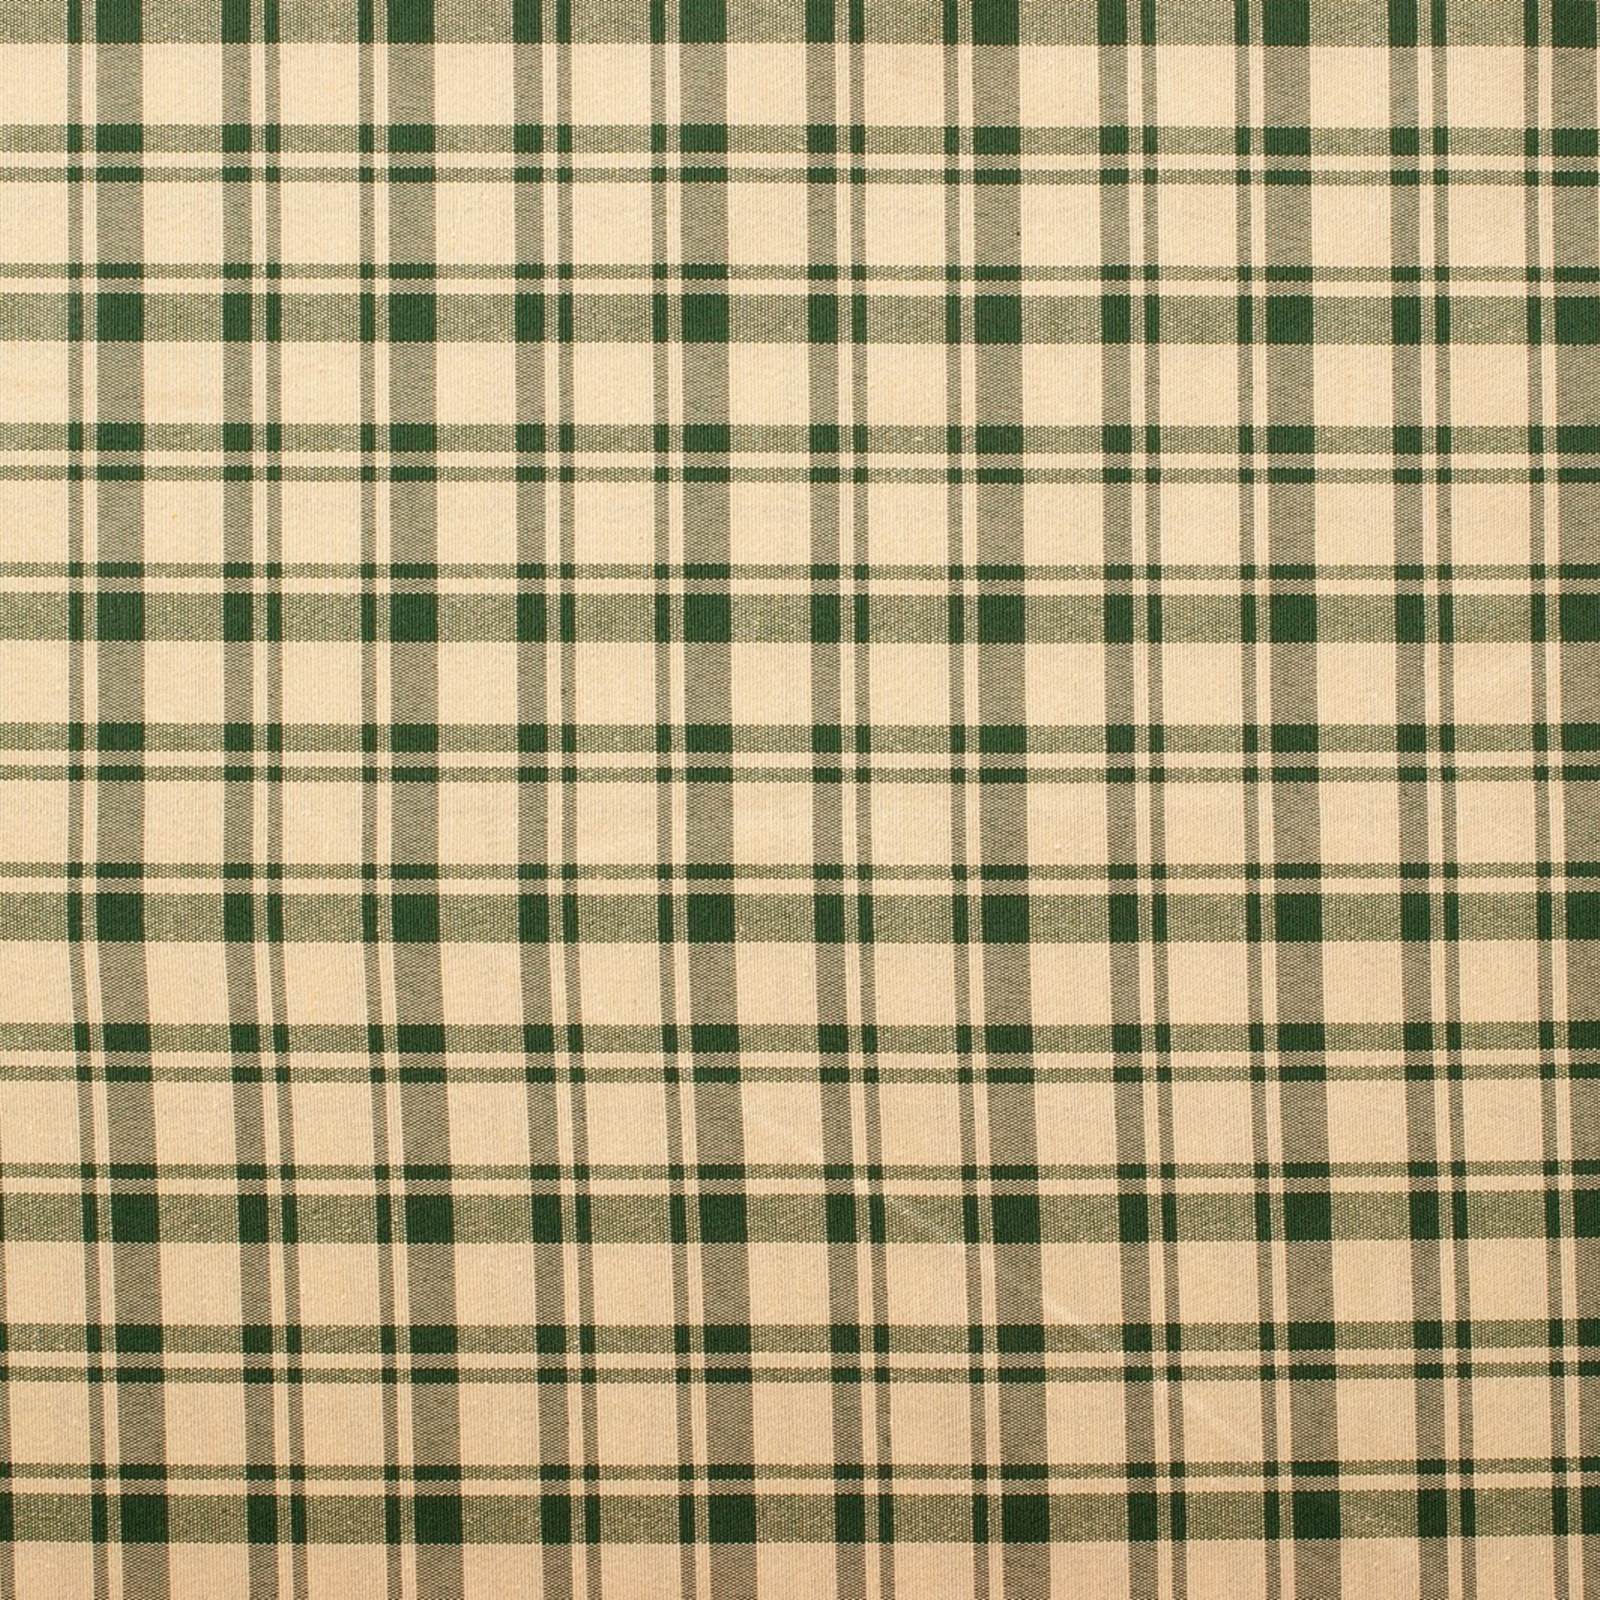 Cottage - woven check - decoration fabric - green